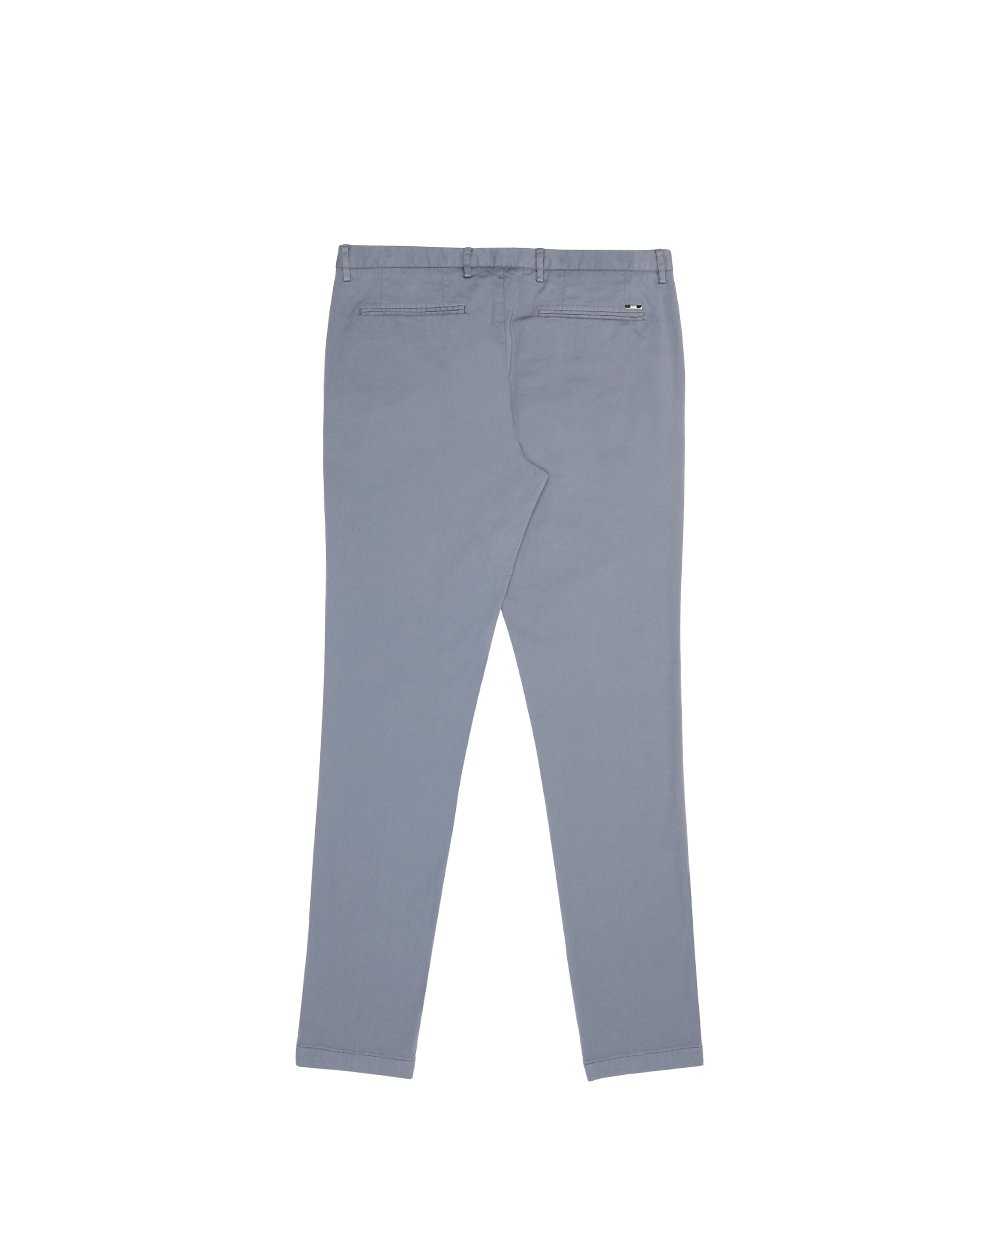 Cotton Pants - ISSI Outlet